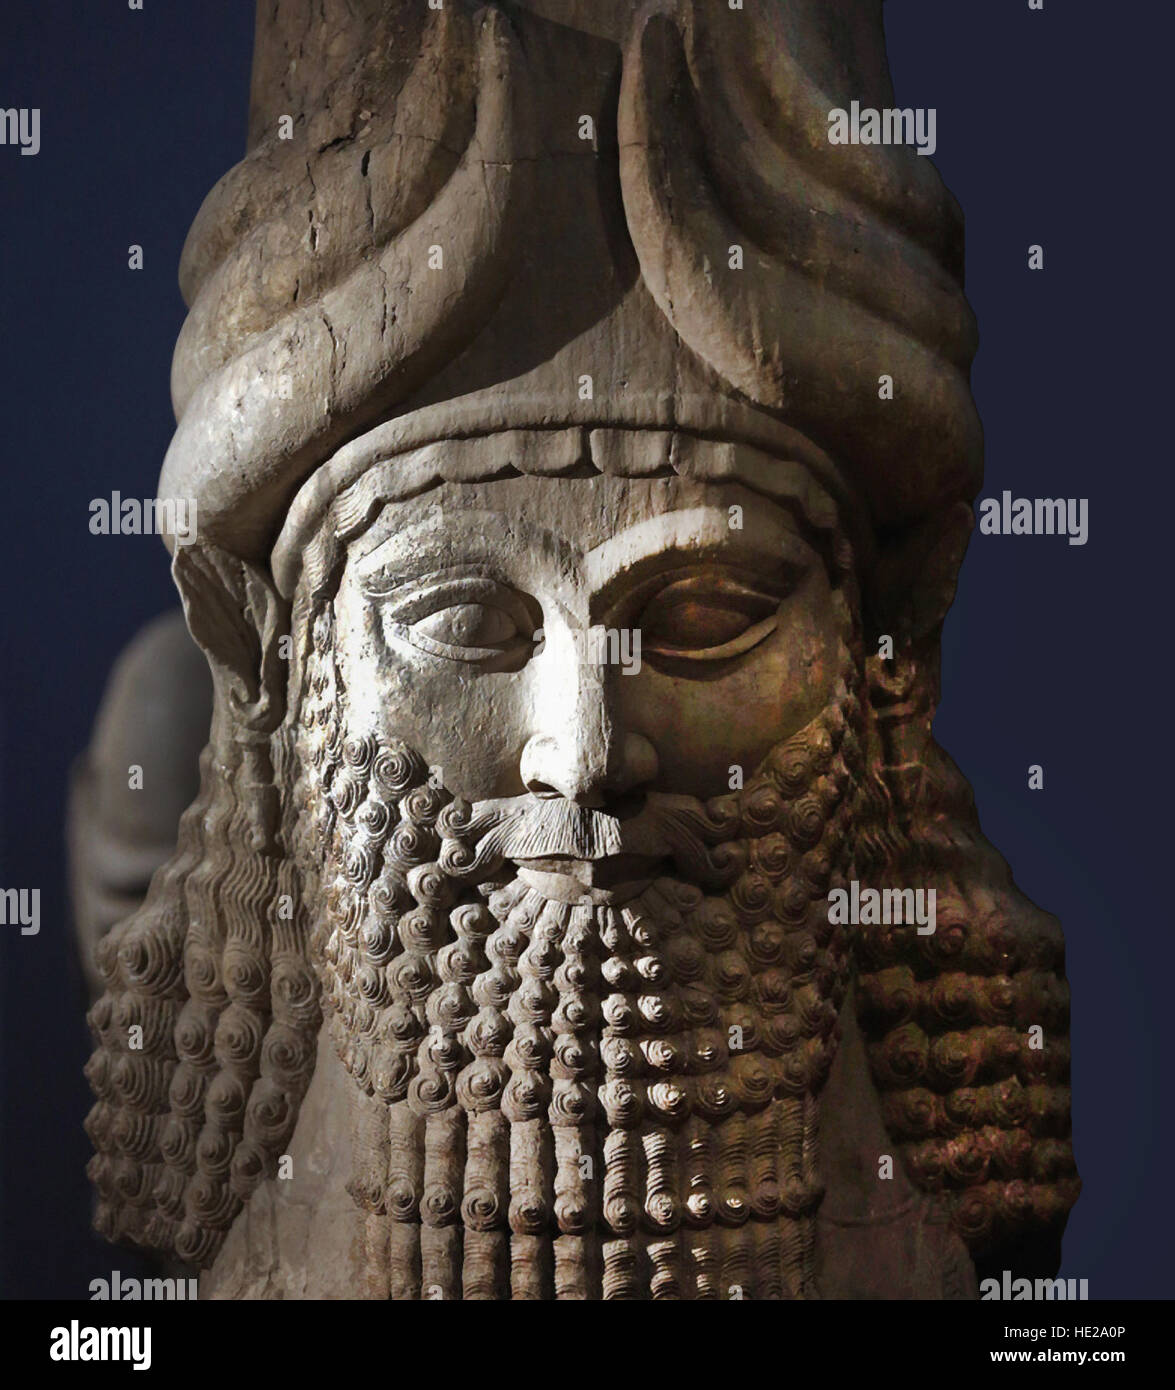 6019. Nebuchadnezzar II was an Assyrian king of the Neo-Babylonian Empire, who reigned c. 605 BC – 562 BC. The destruction of Jerusalem's temple are a Stock Photo